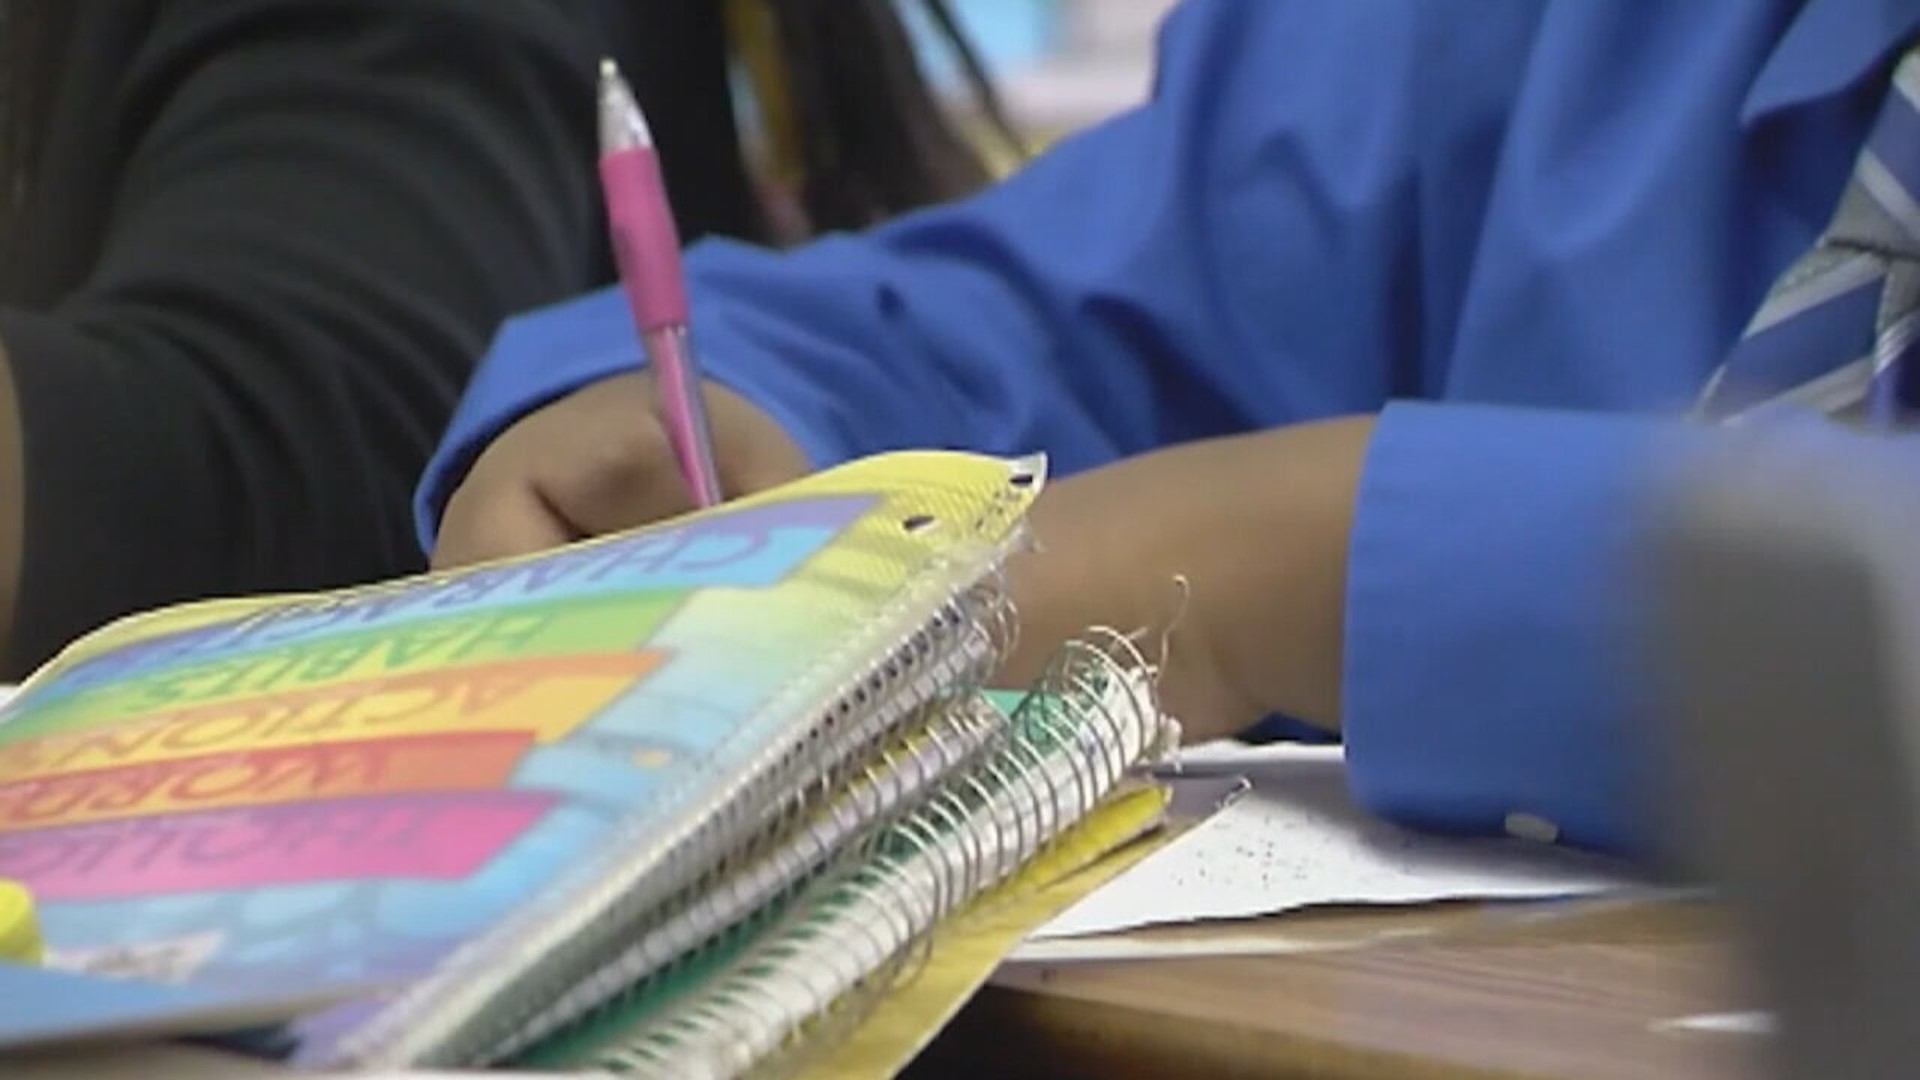 Lawmakers on both sides of the isle want more education funding on the books, but they haven’t agreed on how it should be spent.